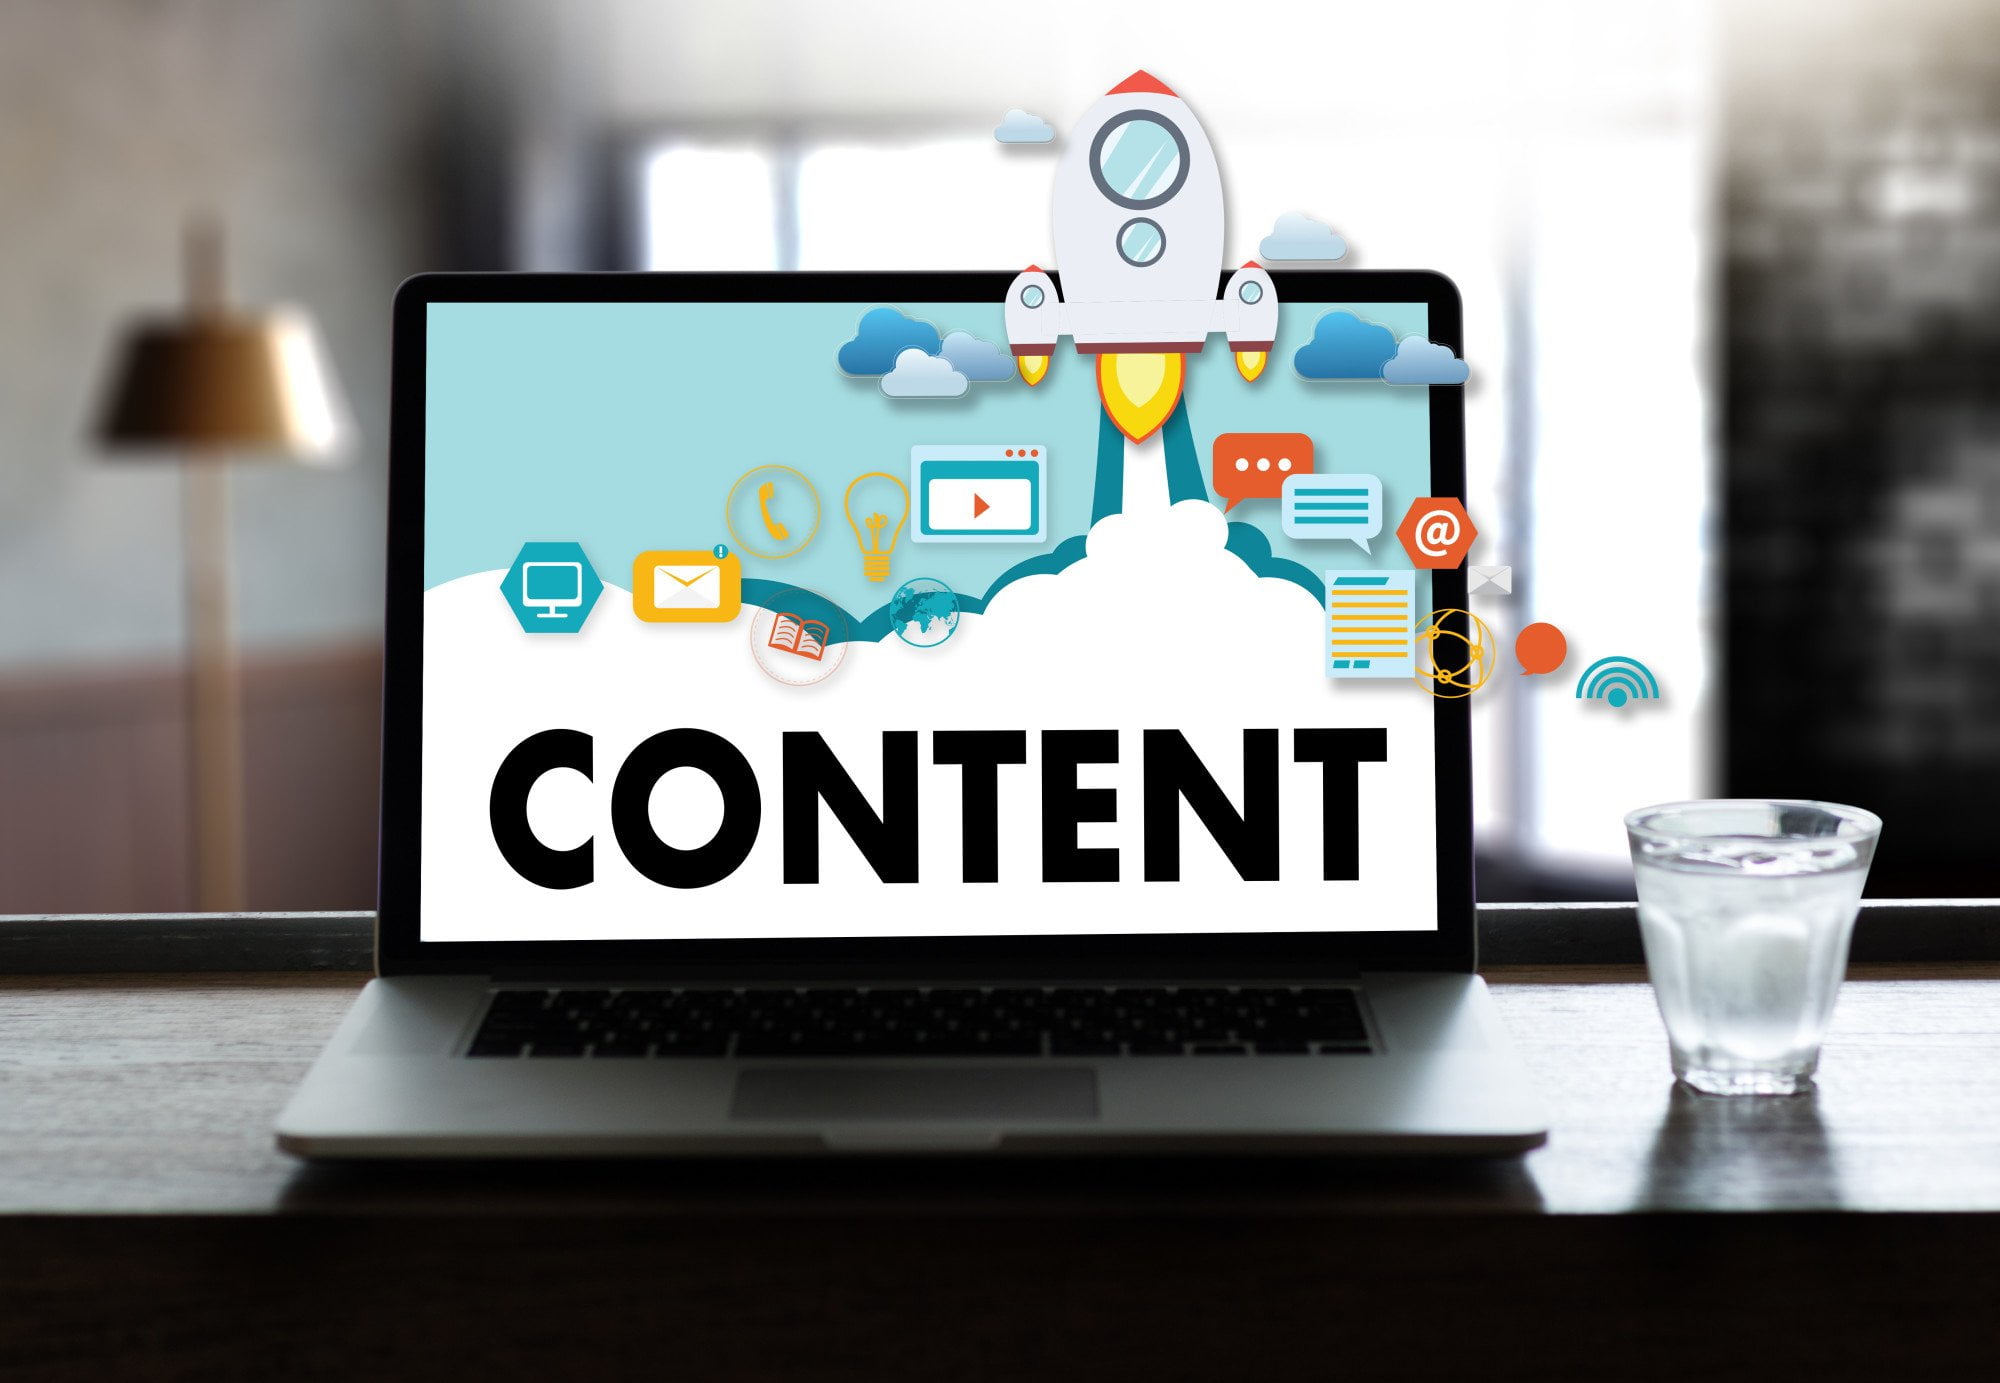 There are several things you need to know when comparing content SEO vs technical SEO. Learn more about these differences right here.